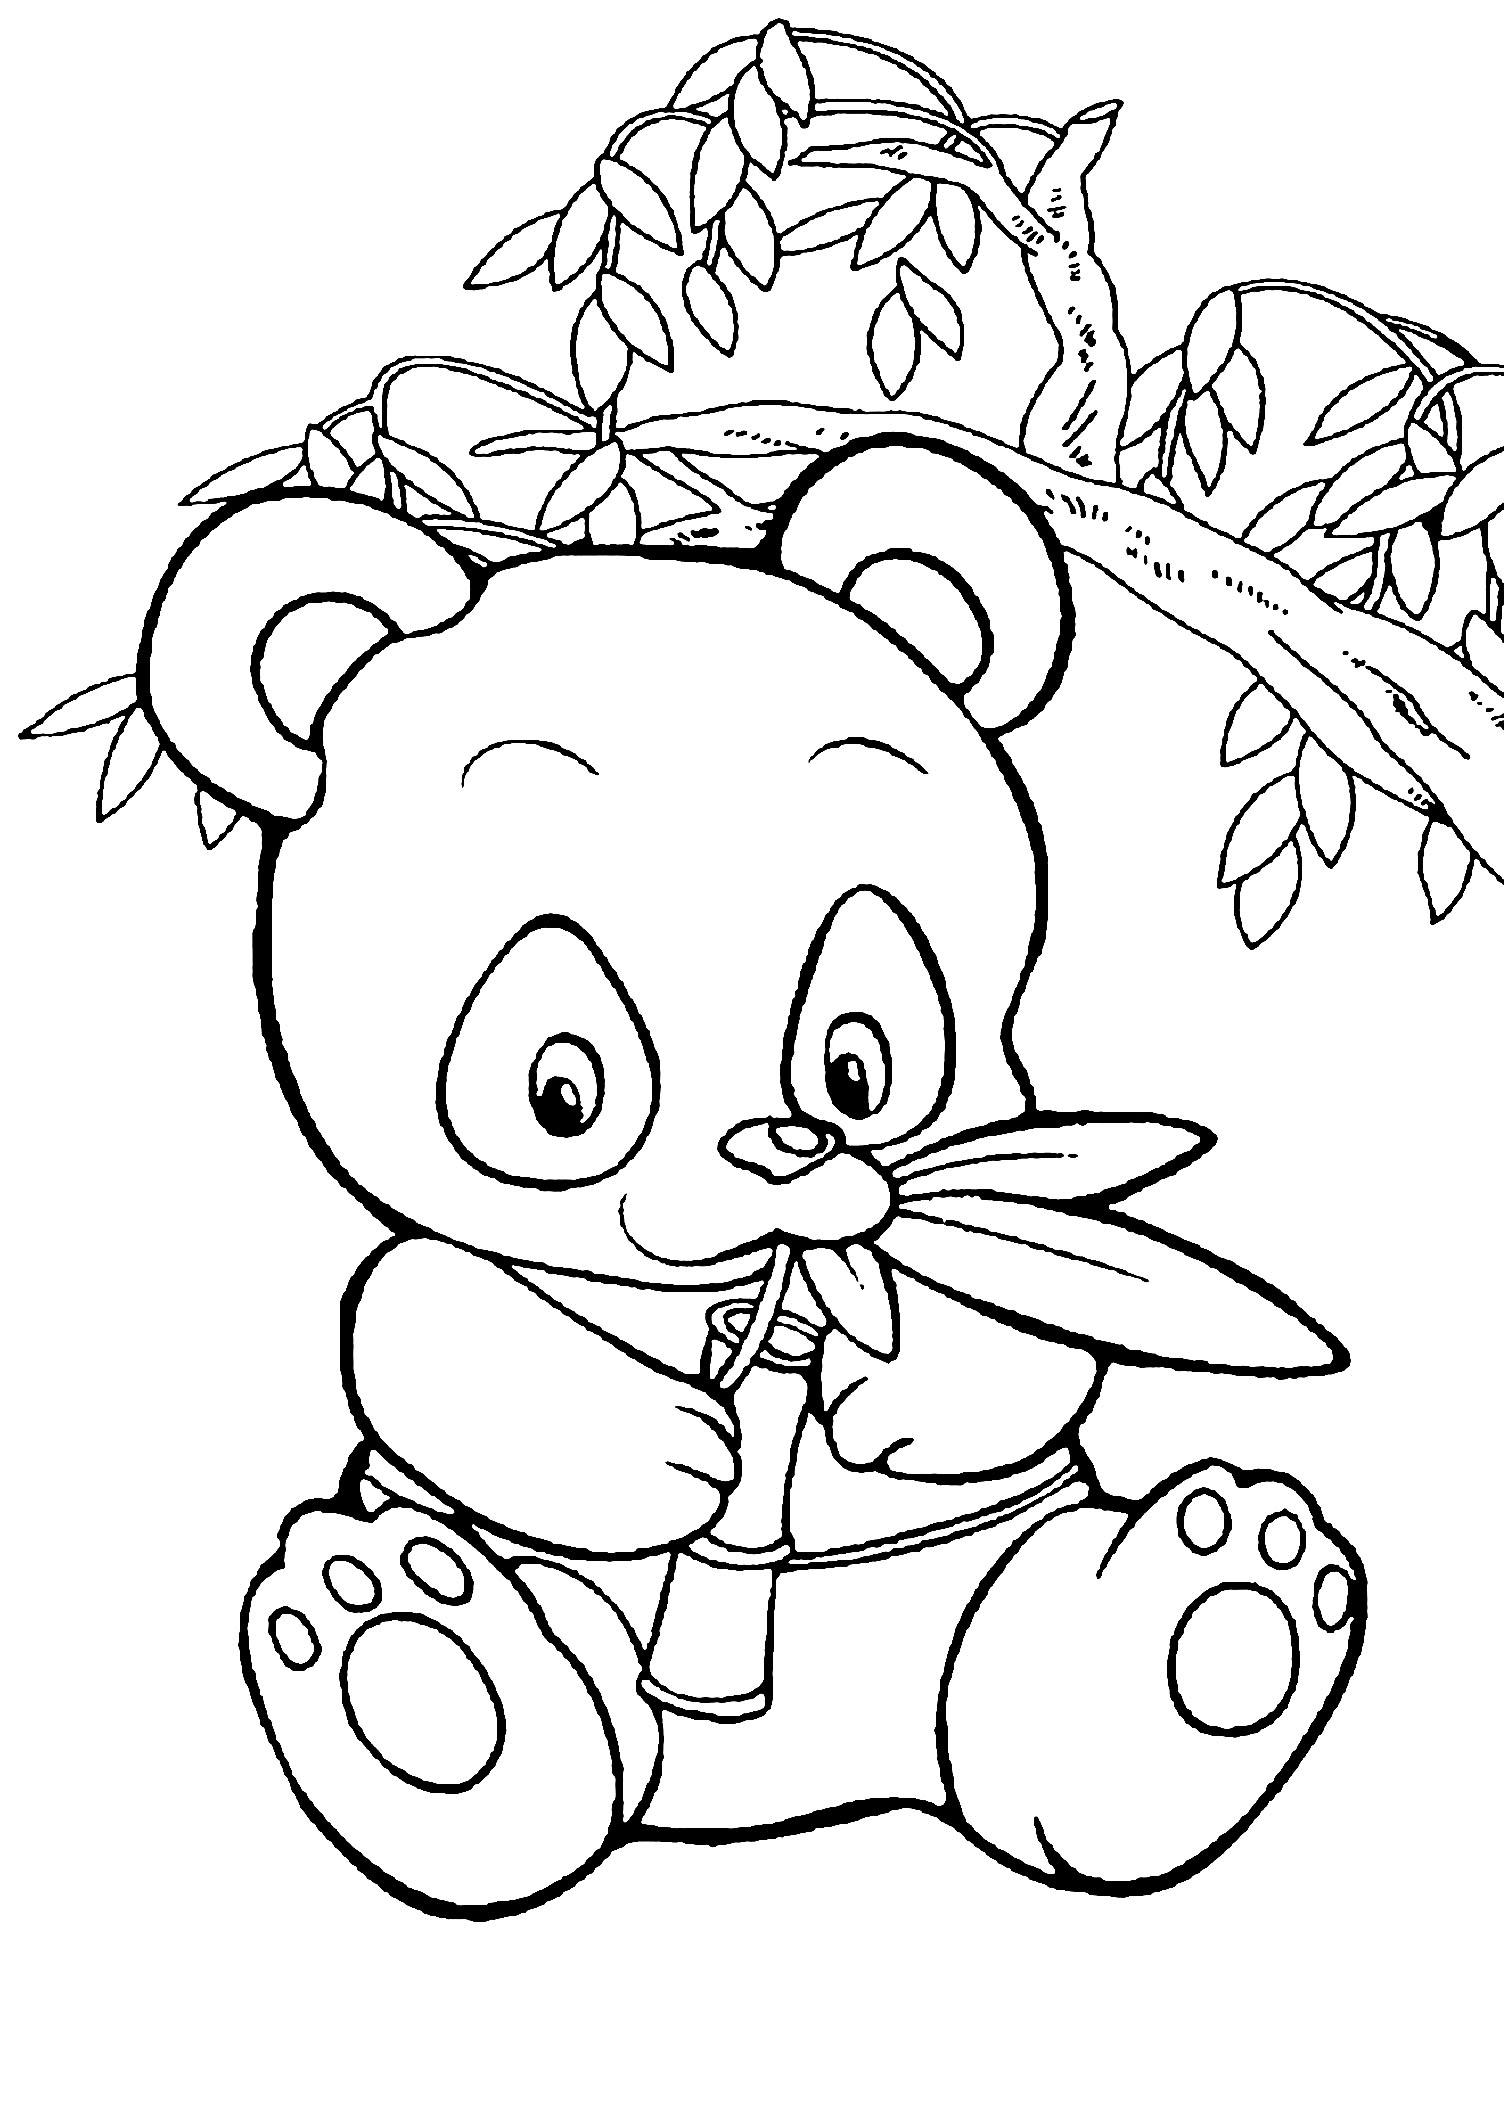 Christmas Pandas Colouring Pages Sketch Coloring Page